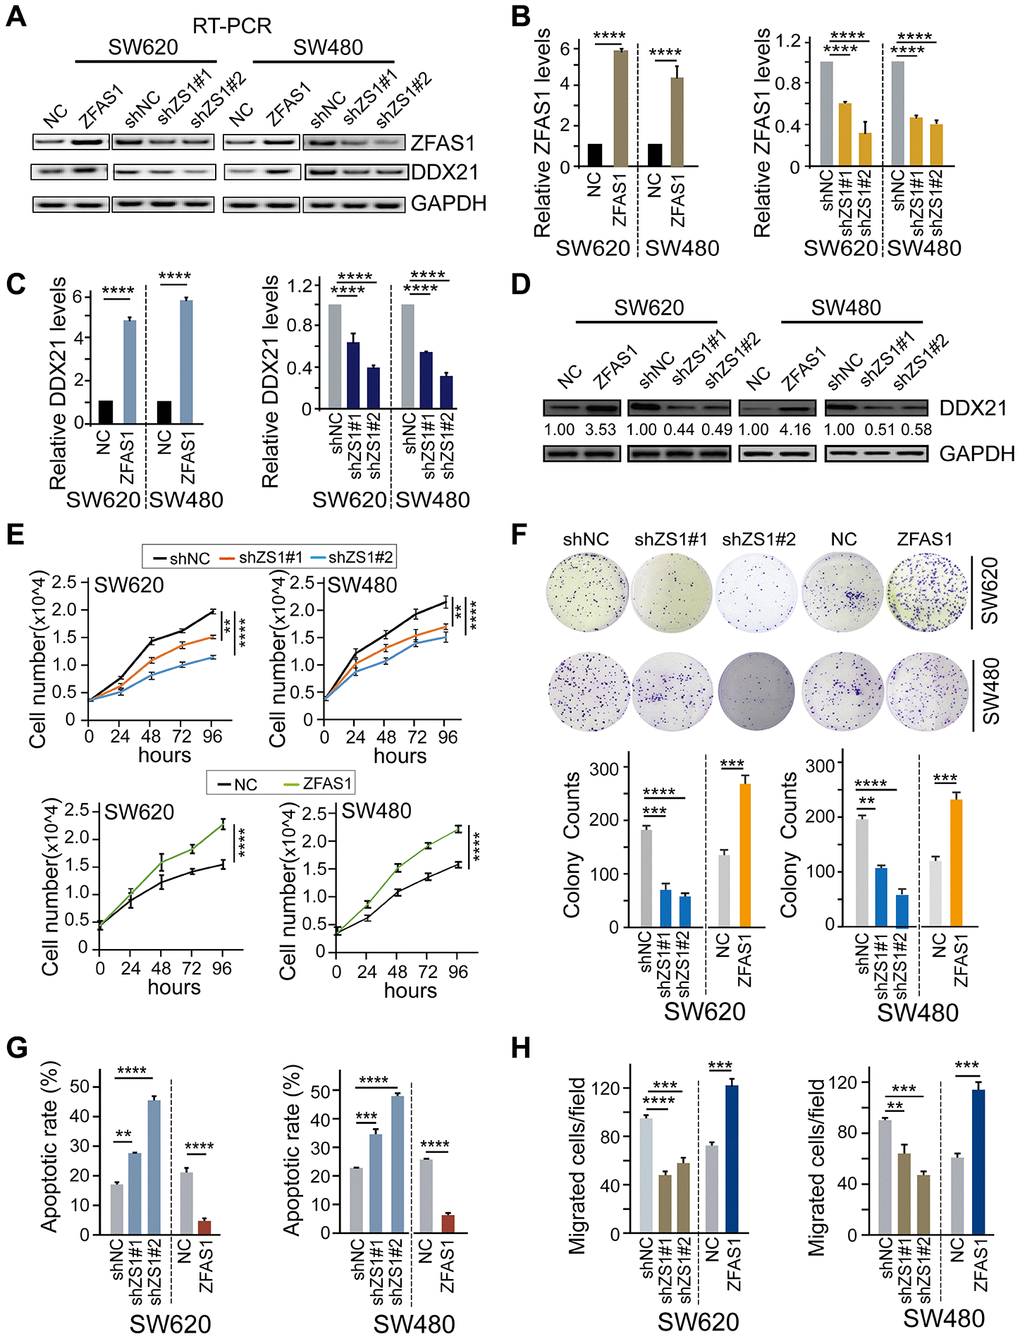 The effect of lncRNA ZFAS1 on CRC cell biological characteristics by regulating DDX21. (A and B) The expression of lncRNA ZFAS1 after overexpression or silencing lncRNA ZFAS1 in SW620 and SW480 cells by RT-PCR (A) and qPCR assay (B). (C and D) The mRNA and protein levels of DDX21 expression after interfering lncRNA ZFAS1 expression in both SW620 and SW480 cells detected by qPCR assay (C), and western blot (D). (E) Cell number monitoring assays showed the cell proliferative variation after ectopic or knockdown lncRNA ZFAS1 in SW620 and SW480 cells. (F) Cell colony formation assays were performed to identify the cell cloning capability upon lncRNA ZFAS1 silencing or overexpressing in SW620 and SW480 cells. n = 3 independent experiments. (G) The percentage (%) of cell apoptosis was detected upon lncRNA ZFAS1 overexpressing or silencing in SW620 and SW480 cells by Flow cytometry. n = 3 independent experiments. (H) The migration ability was determined after ectopic or knockdown lncRNA ZFAS1 in SW620 and SW480 cells. n = 3 independent experiments. Data were shown as mean ± s.d.. * P P P P 